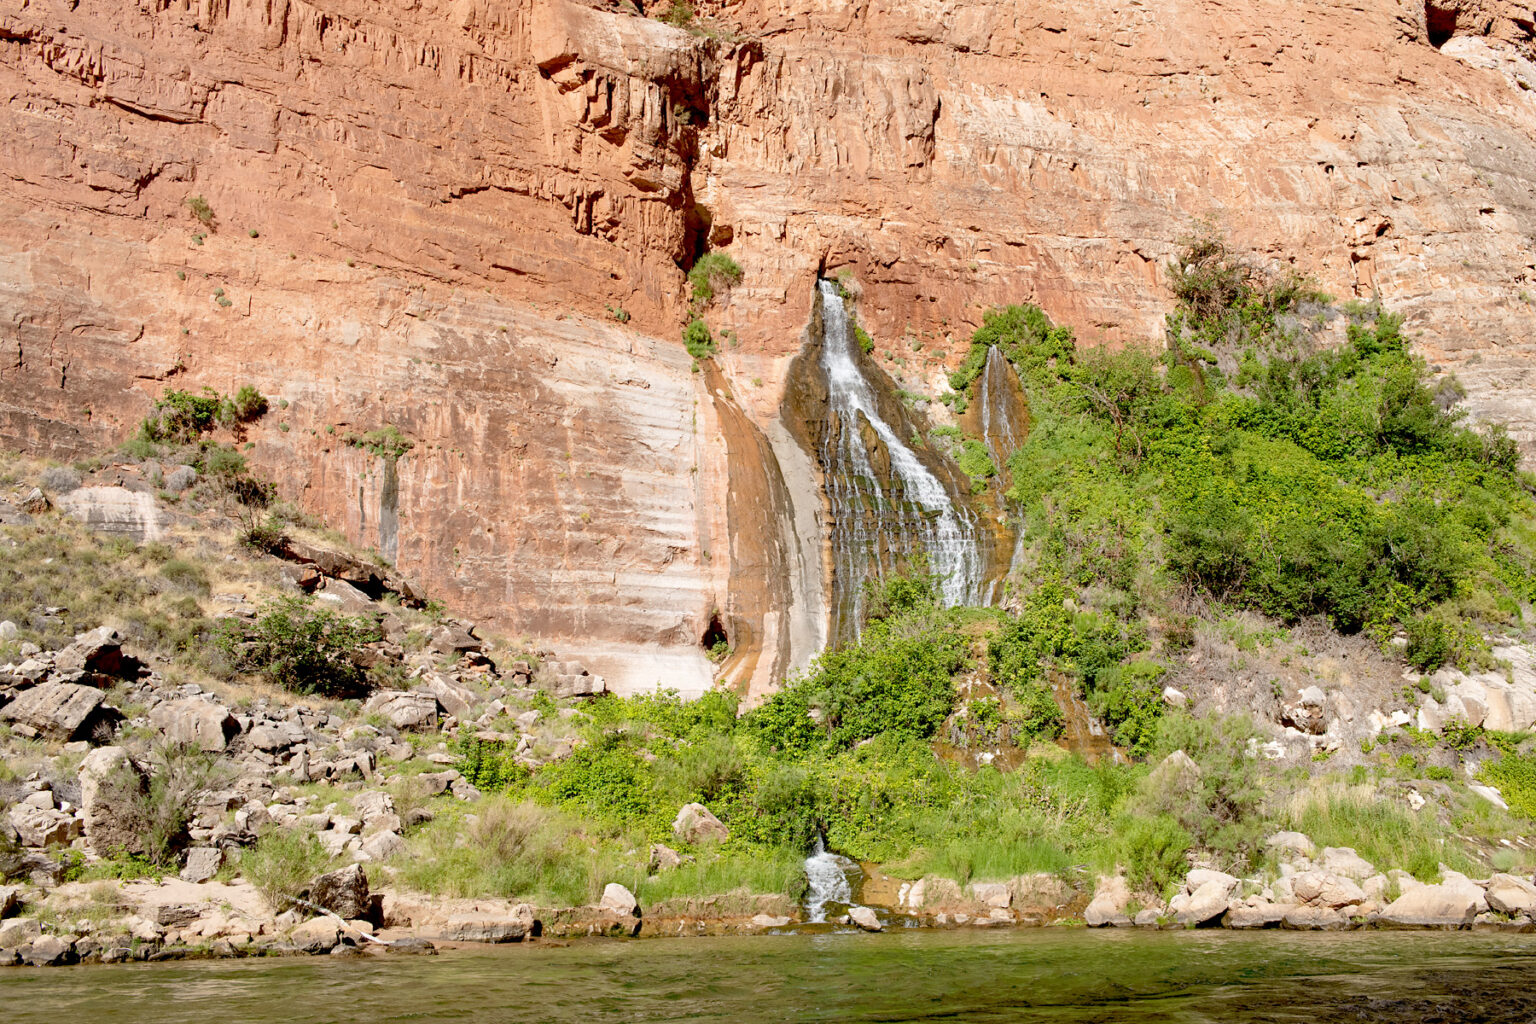 Spring water flows from the canyon wall at Vasey's Paradise in Grand Canyon